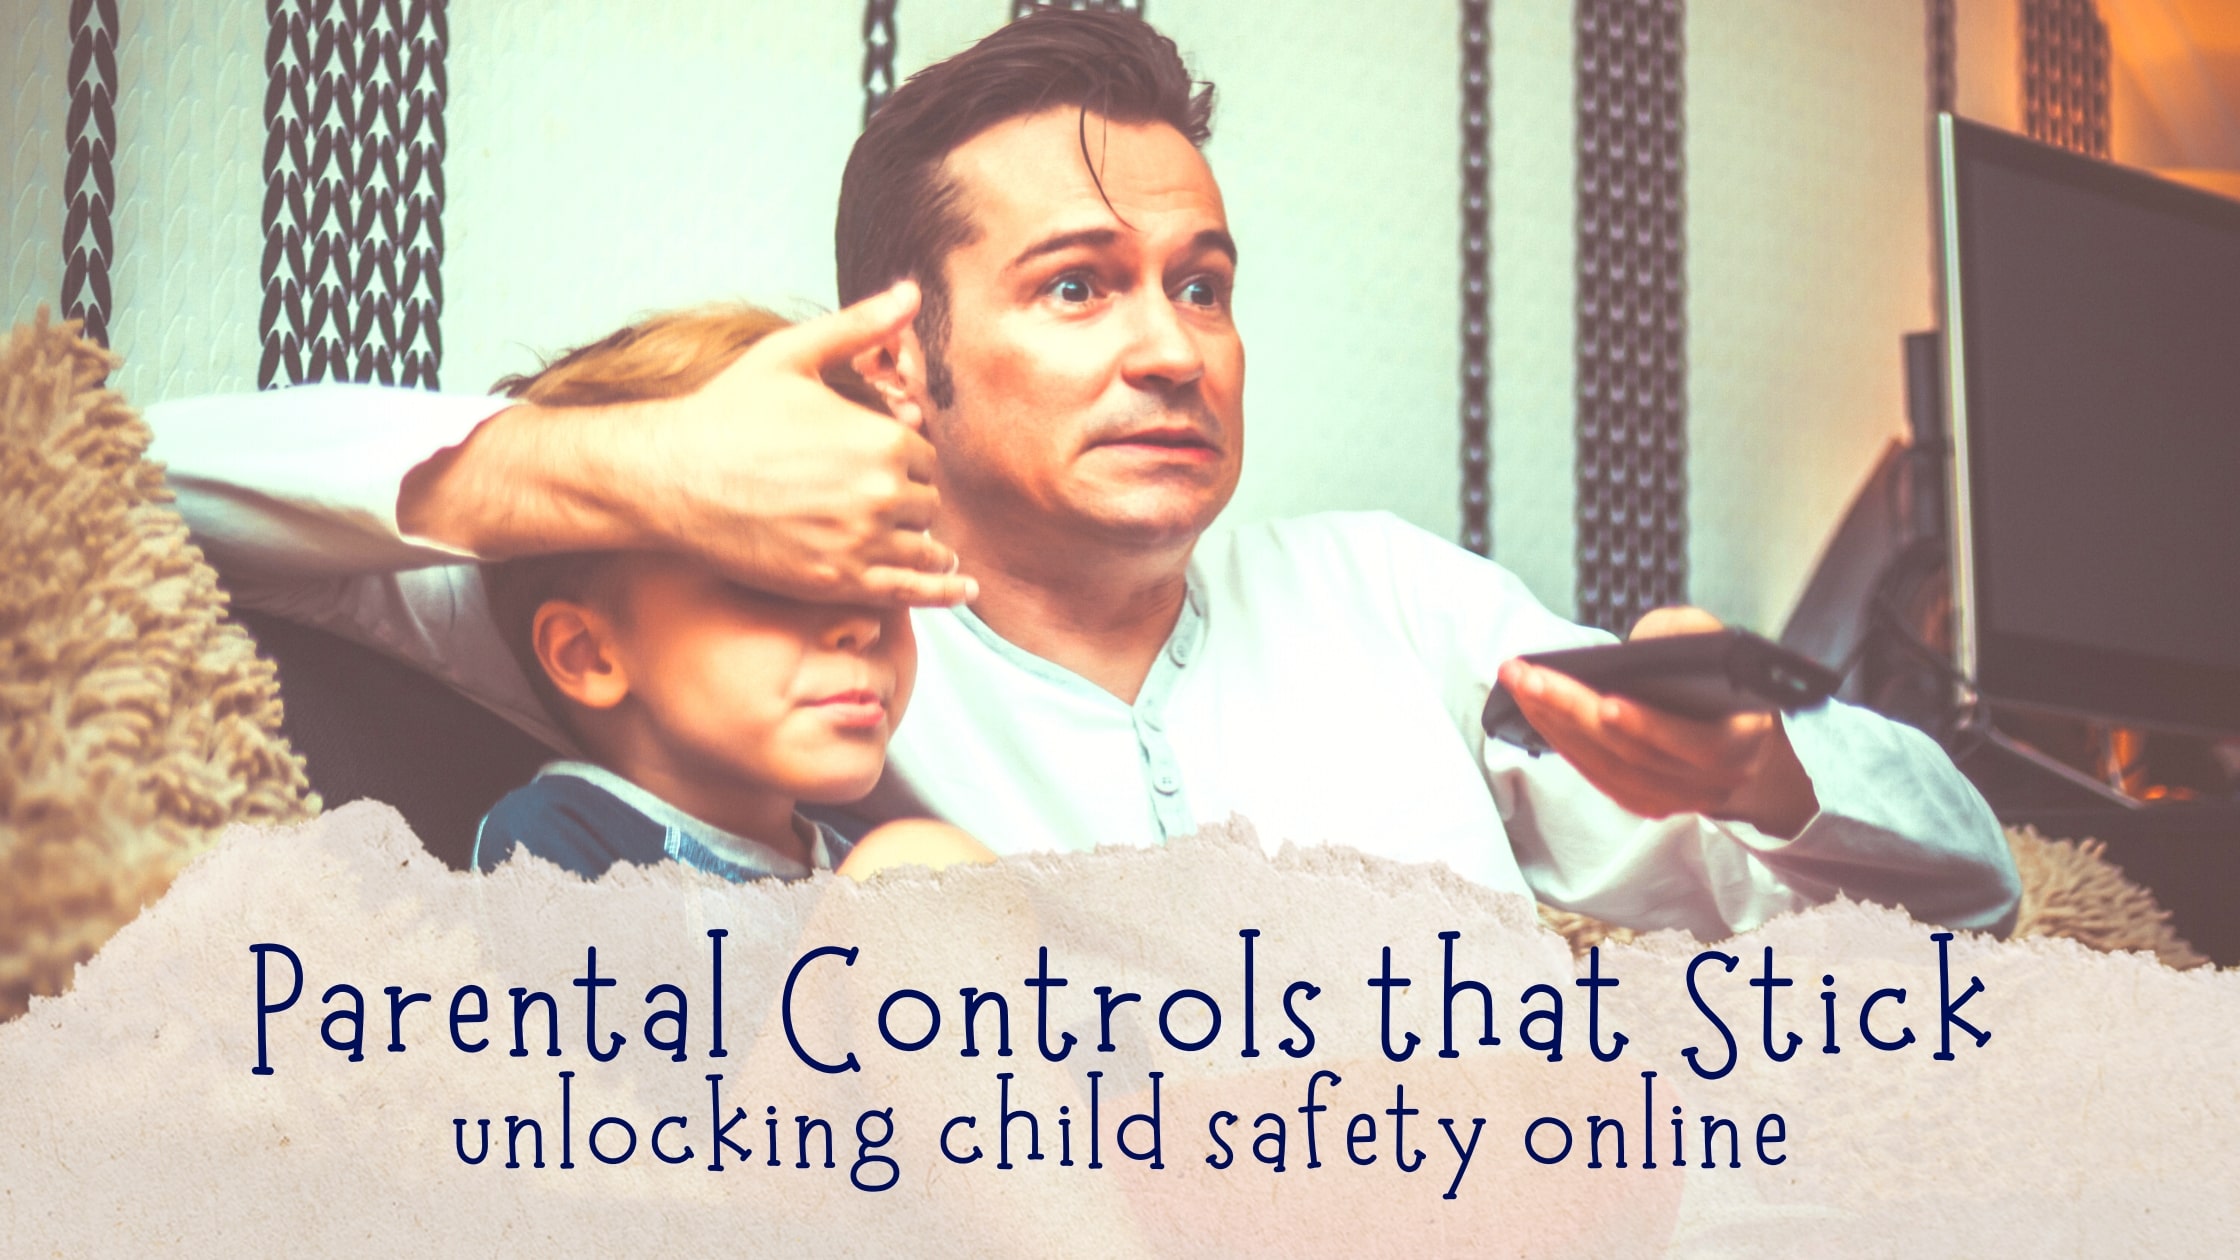 Parental Controls, use Parental Controls, Parental Controls child safety, child screen time, limit screen time, internet safety, child safety online